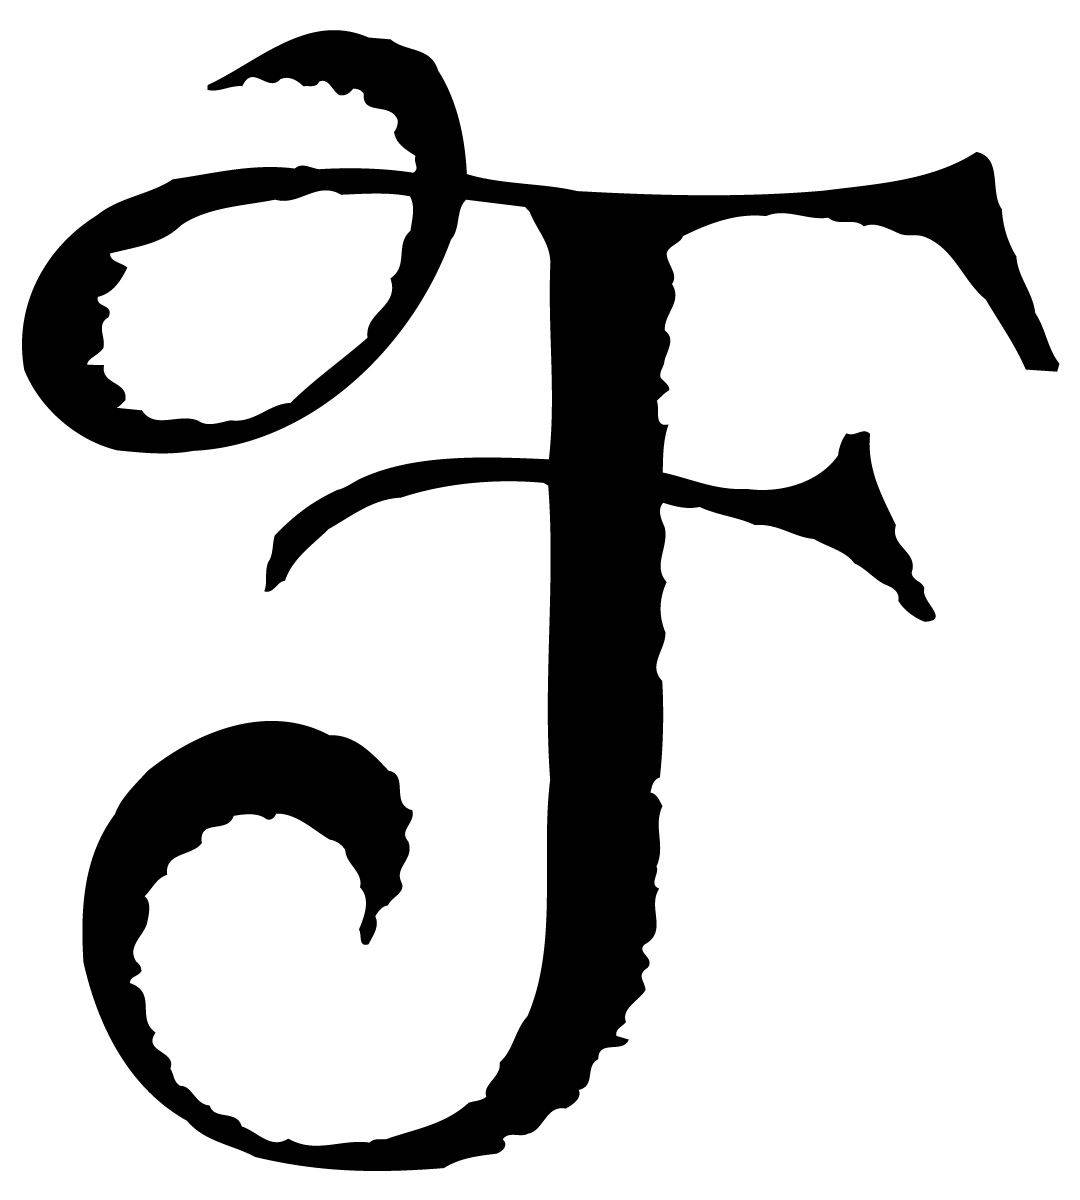 Fancy Calligraphy Letter F